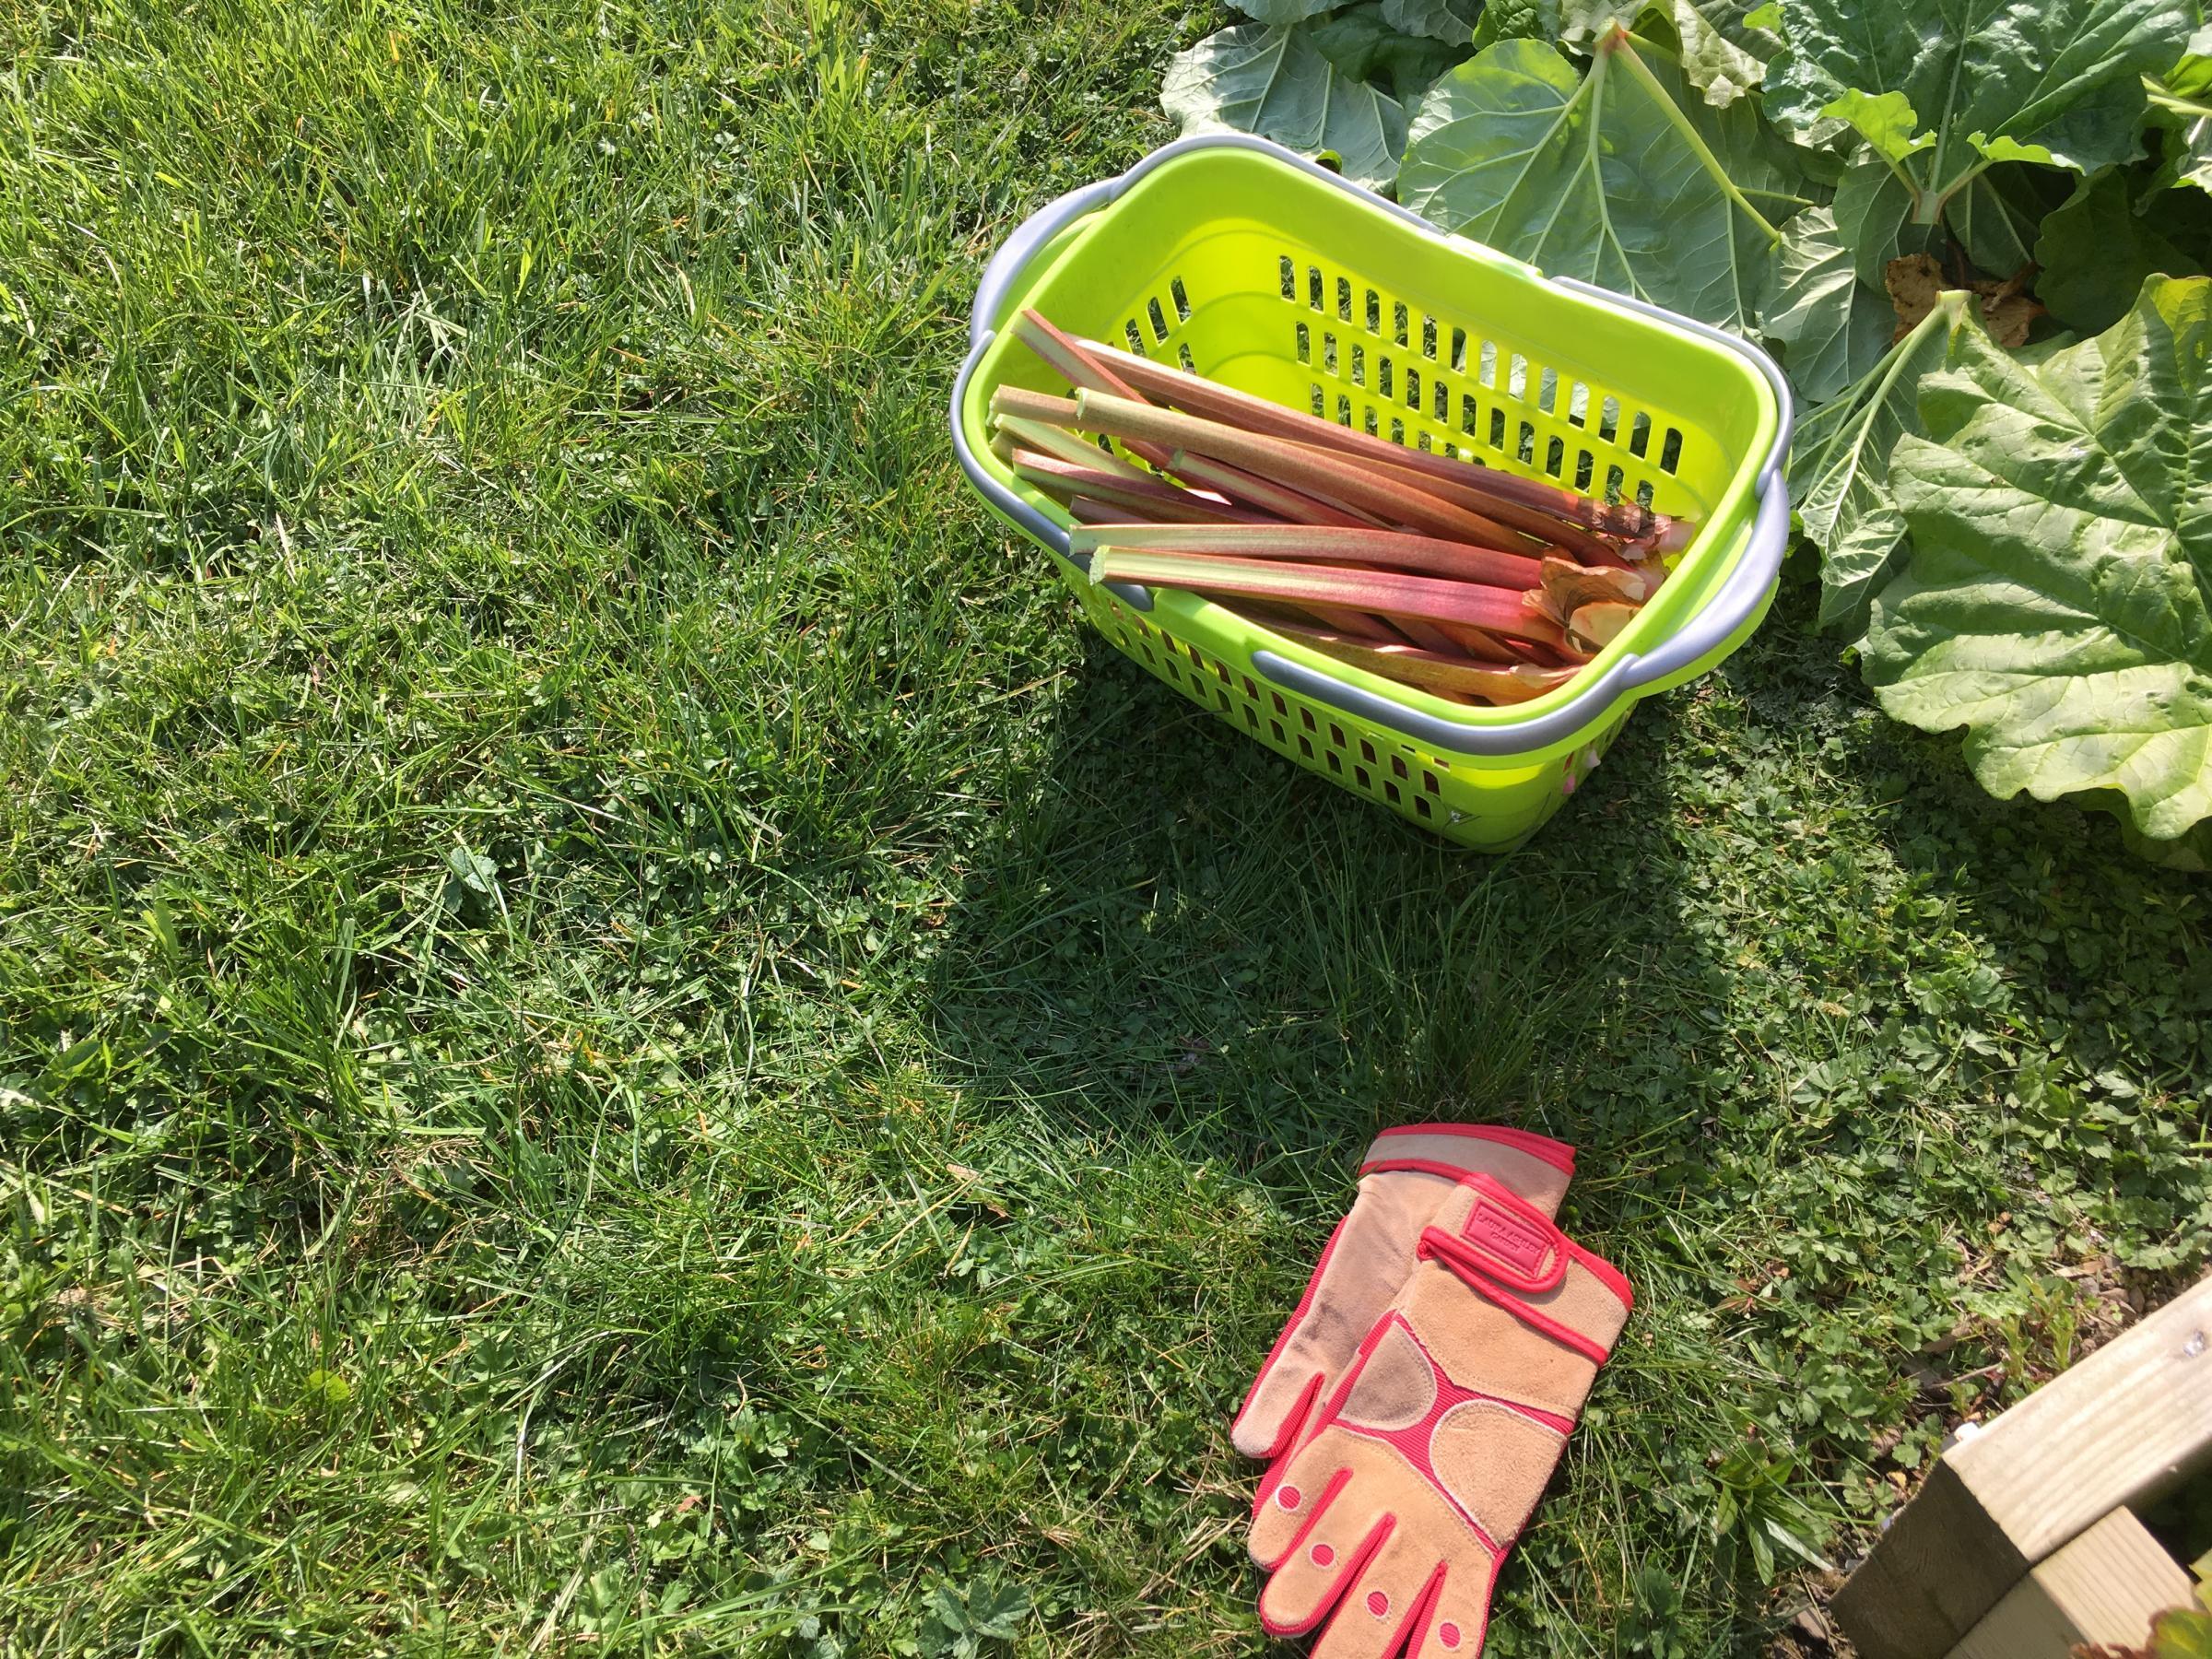 The beginning of the rhubarb harvest for Angel Feathers.